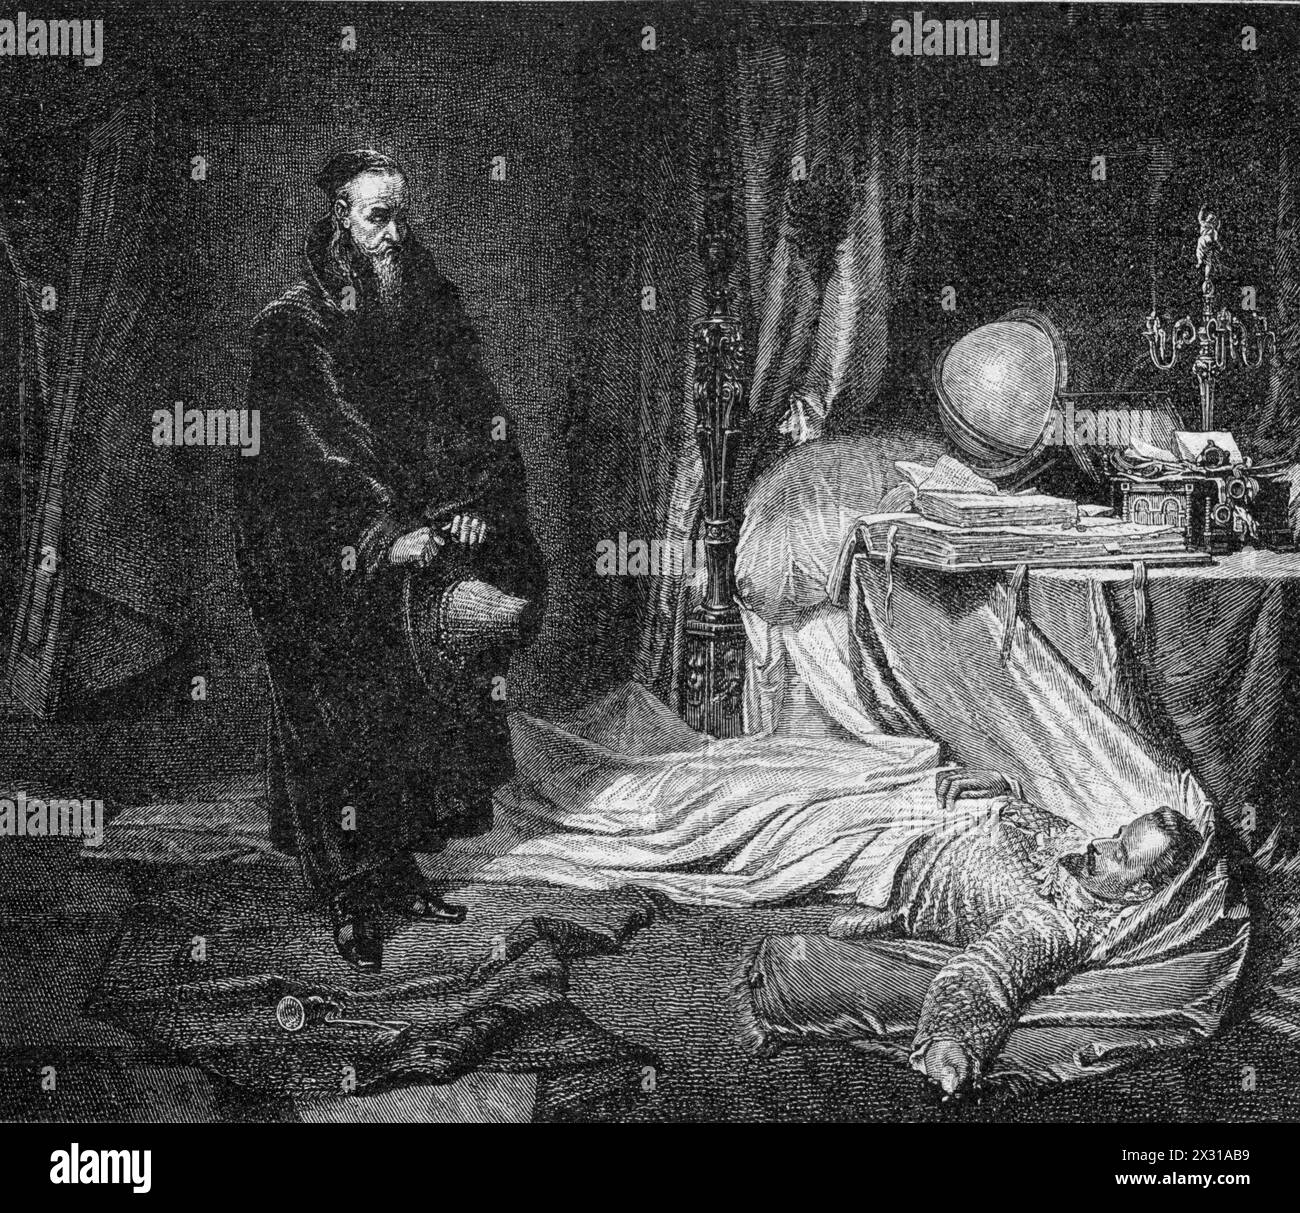 Seni, Giovanni Battista, circa 1600 - 1656, Italian astrologer, at the dead body of Wallenstein, Eger, ADDITIONAL-RIGHTS-CLEARANCE-INFO-NOT-AVAILABLE Stock Photo